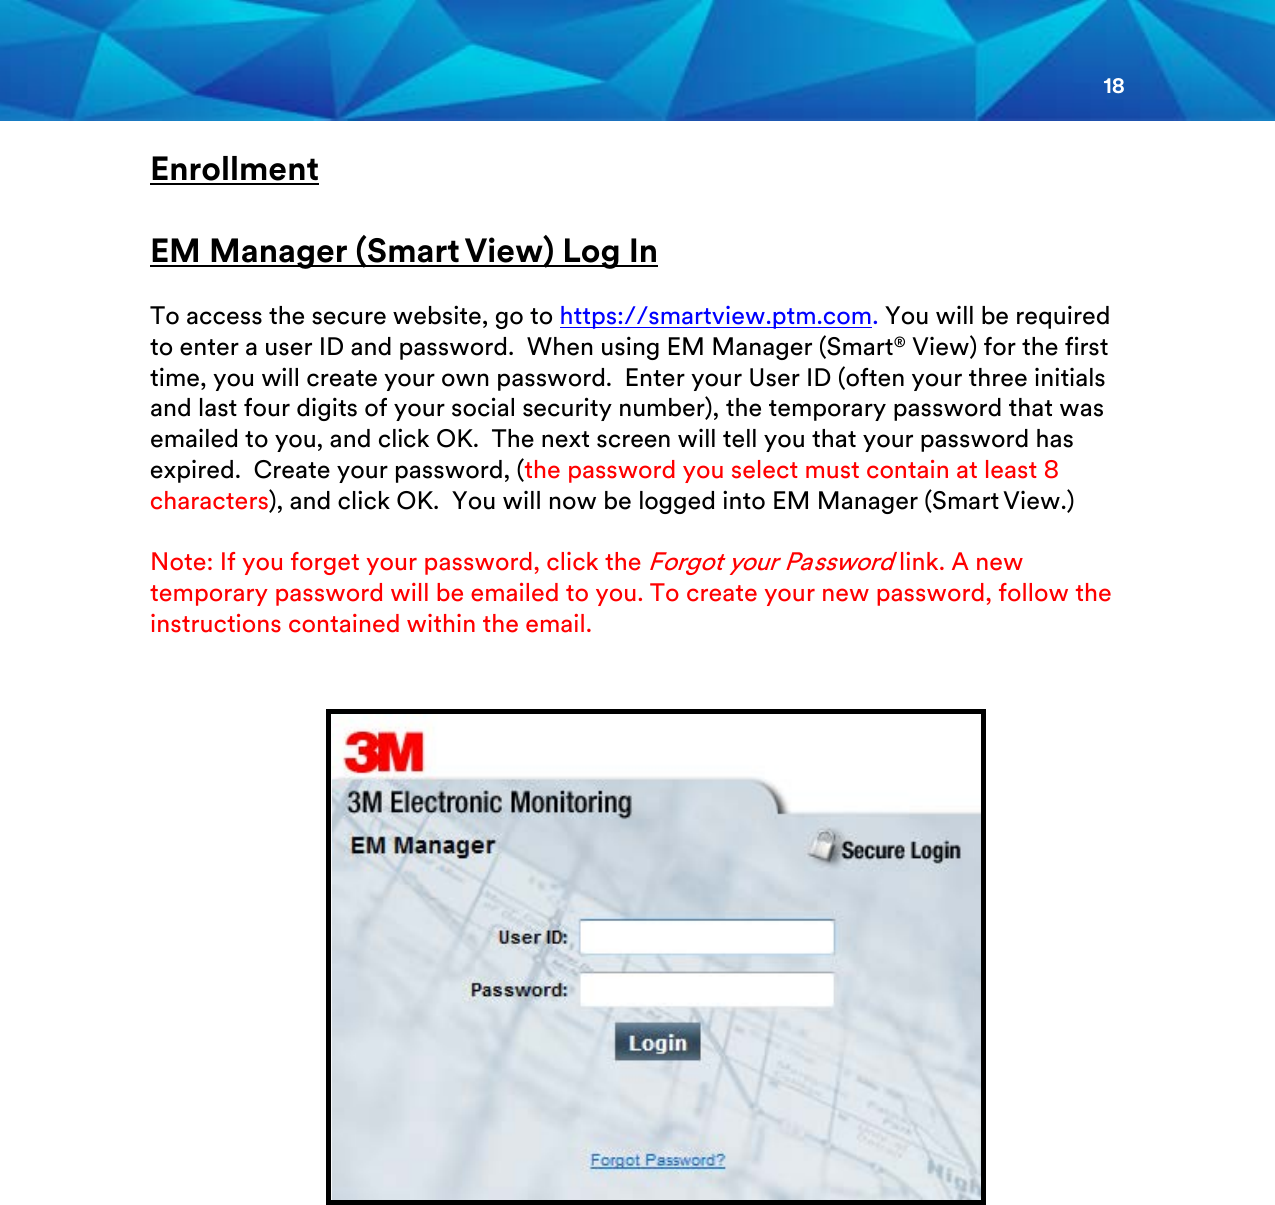 18  Enrollment  EM Manager (Smart View) Log In  To access the secure website, go to https://smartview.ptm.com. You will be required to enter a user ID and password.  When using EM Manager (Smart® View) for the first time, you will create your own password.  Enter your User ID (often your three initials and last four digits of your social security number), the temporary password that was emailed to you, and click OK.  The next screen will tell you that your password has expired.  Create your password, (the password you select must contain at least 8 characters), and click OK.  You will now be logged into EM Manager (Smart View.)  Note: If you forget your password, click the Forgot your Password link. A new temporary password will be emailed to you. To create your new password, follow the instructions contained within the email.              